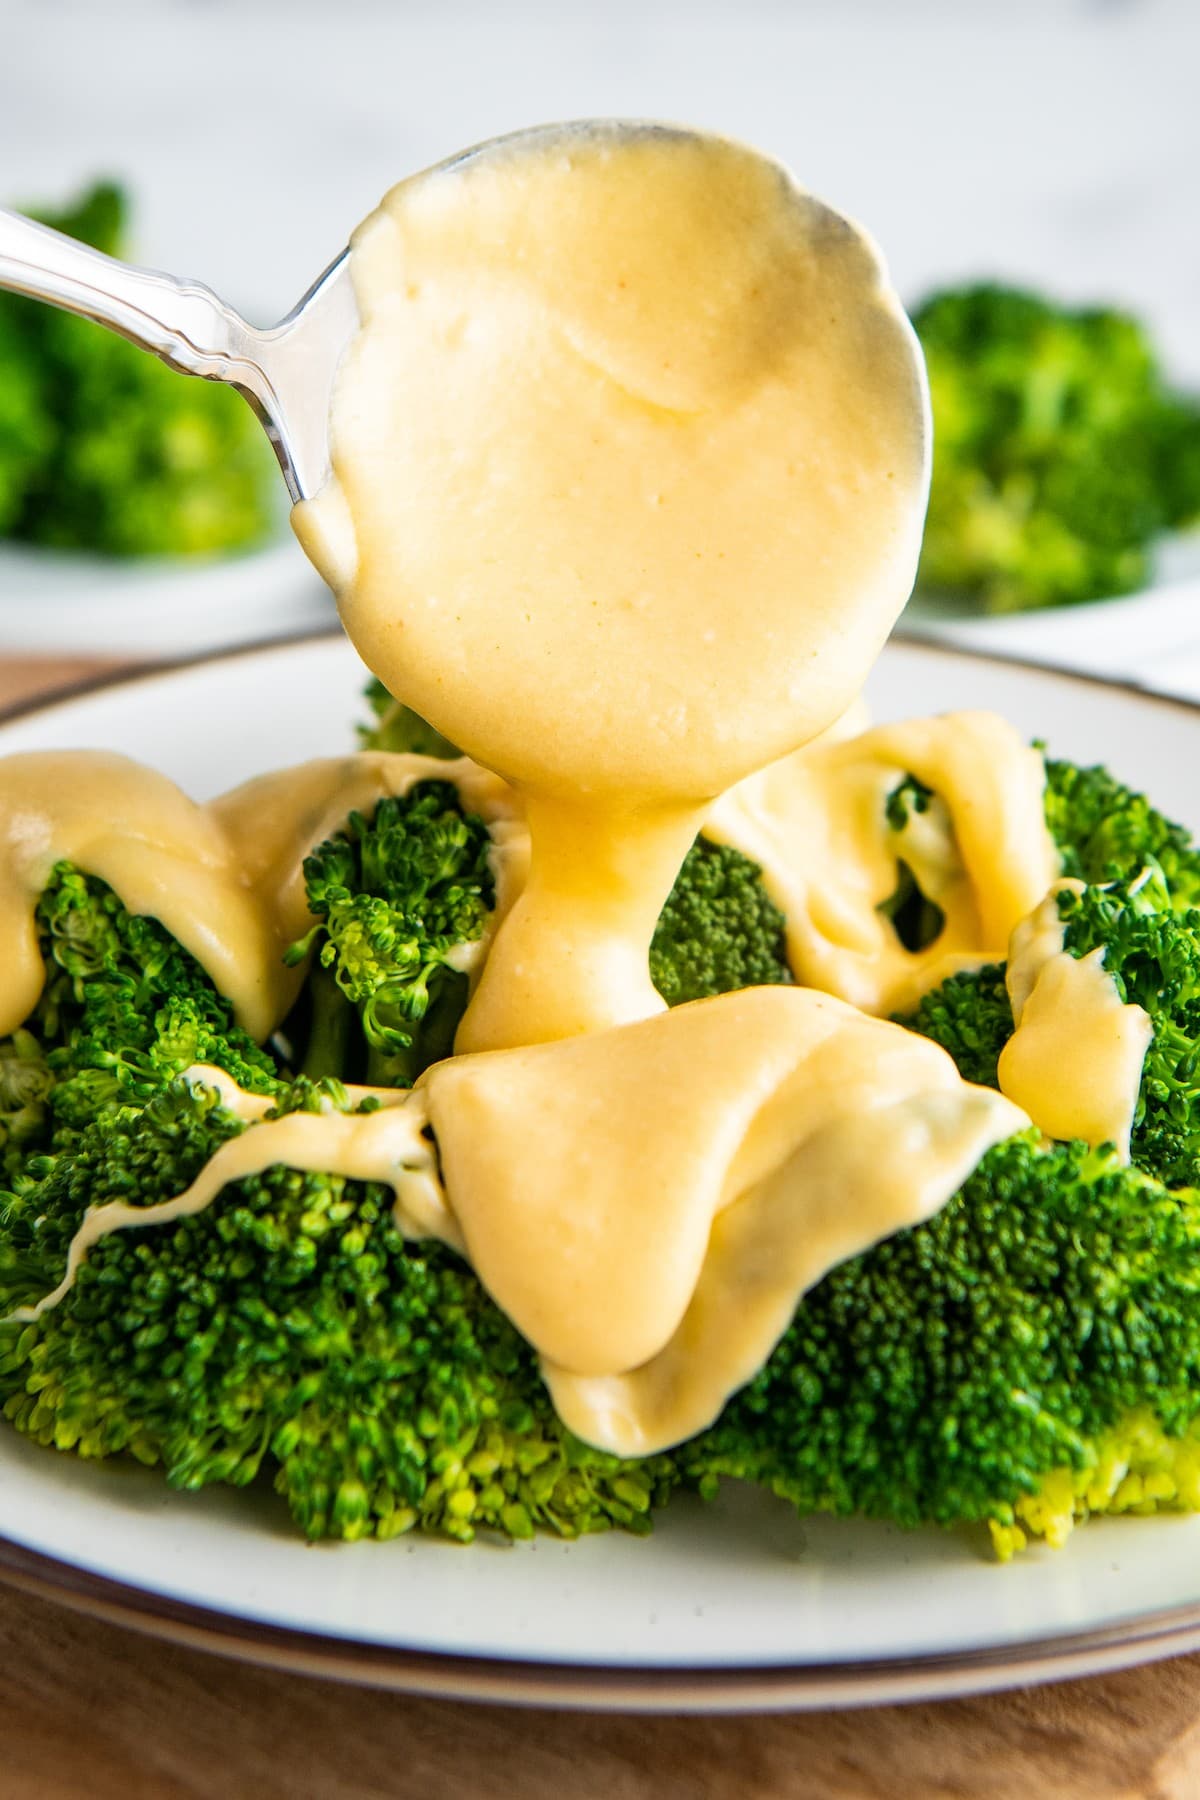 Cheese sauce poured over steamed broccoli.